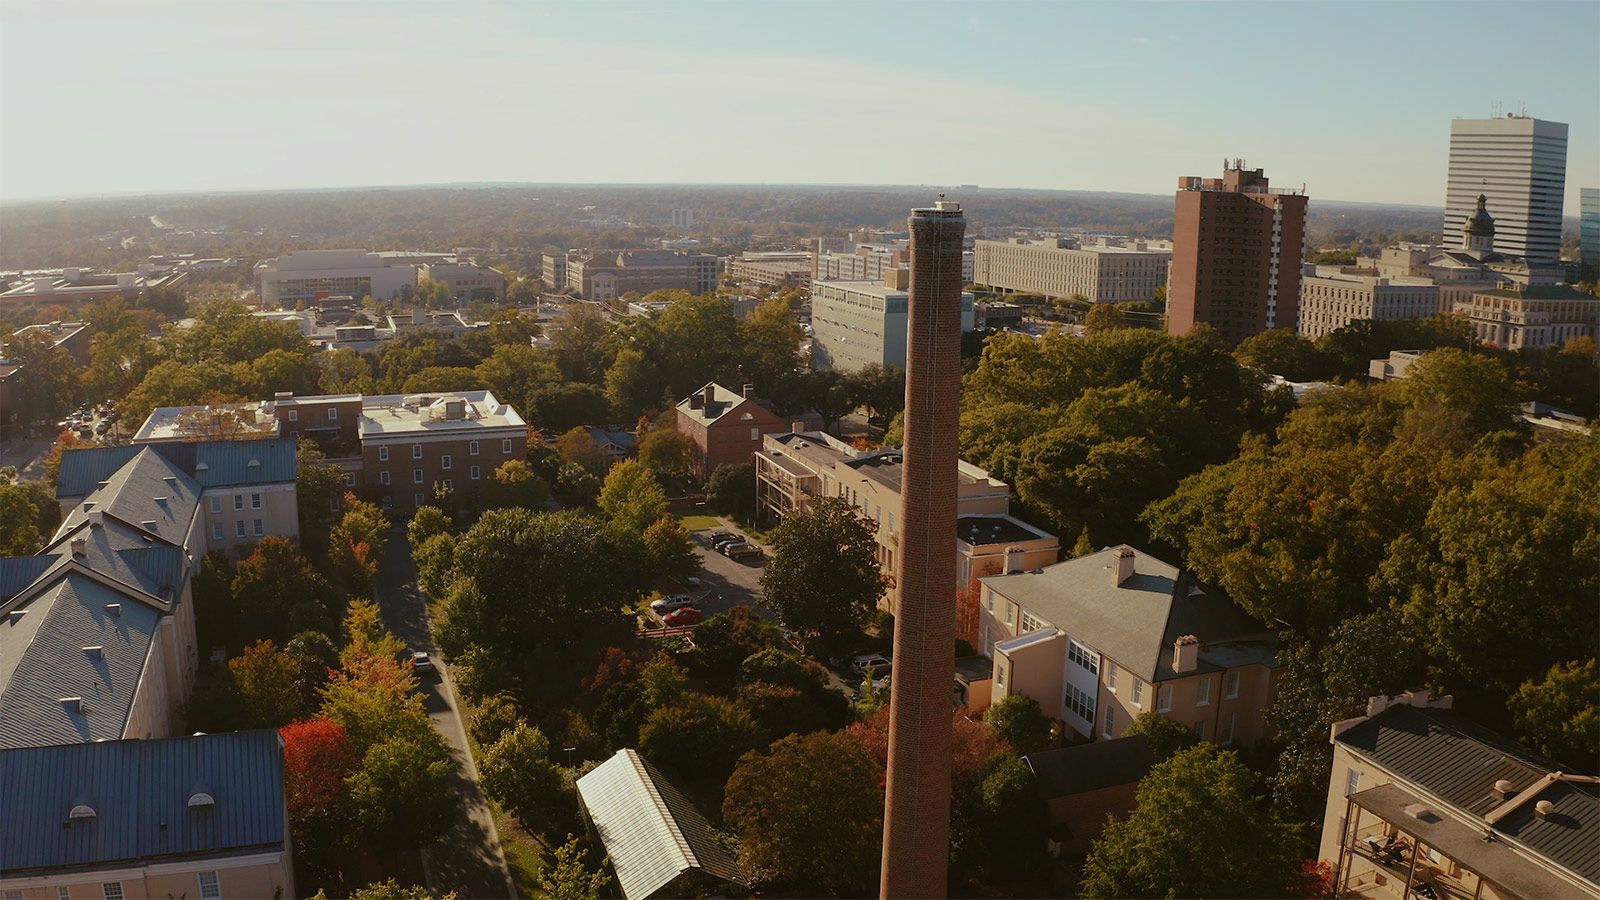 Aerial view of campus with rooftops, trees the smokestack in foreground and city of Columbia skyline off in the distance.